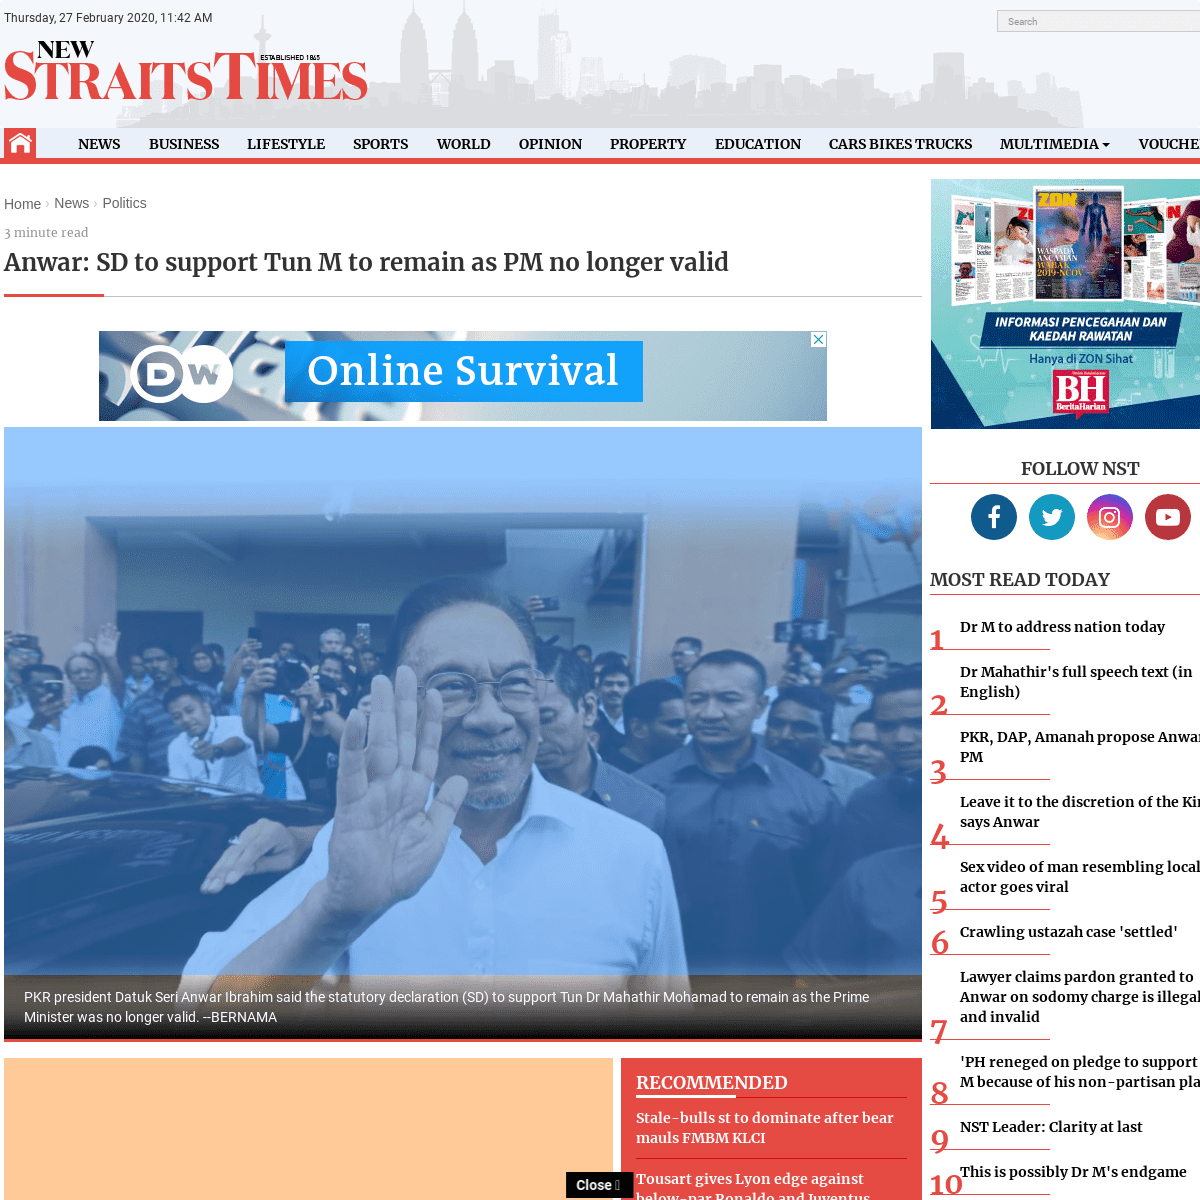 A complete backup of www.nst.com.my/news/politics/2020/02/569322/anwar-sd-support-tun-m-remain-pm-no-longer-valid